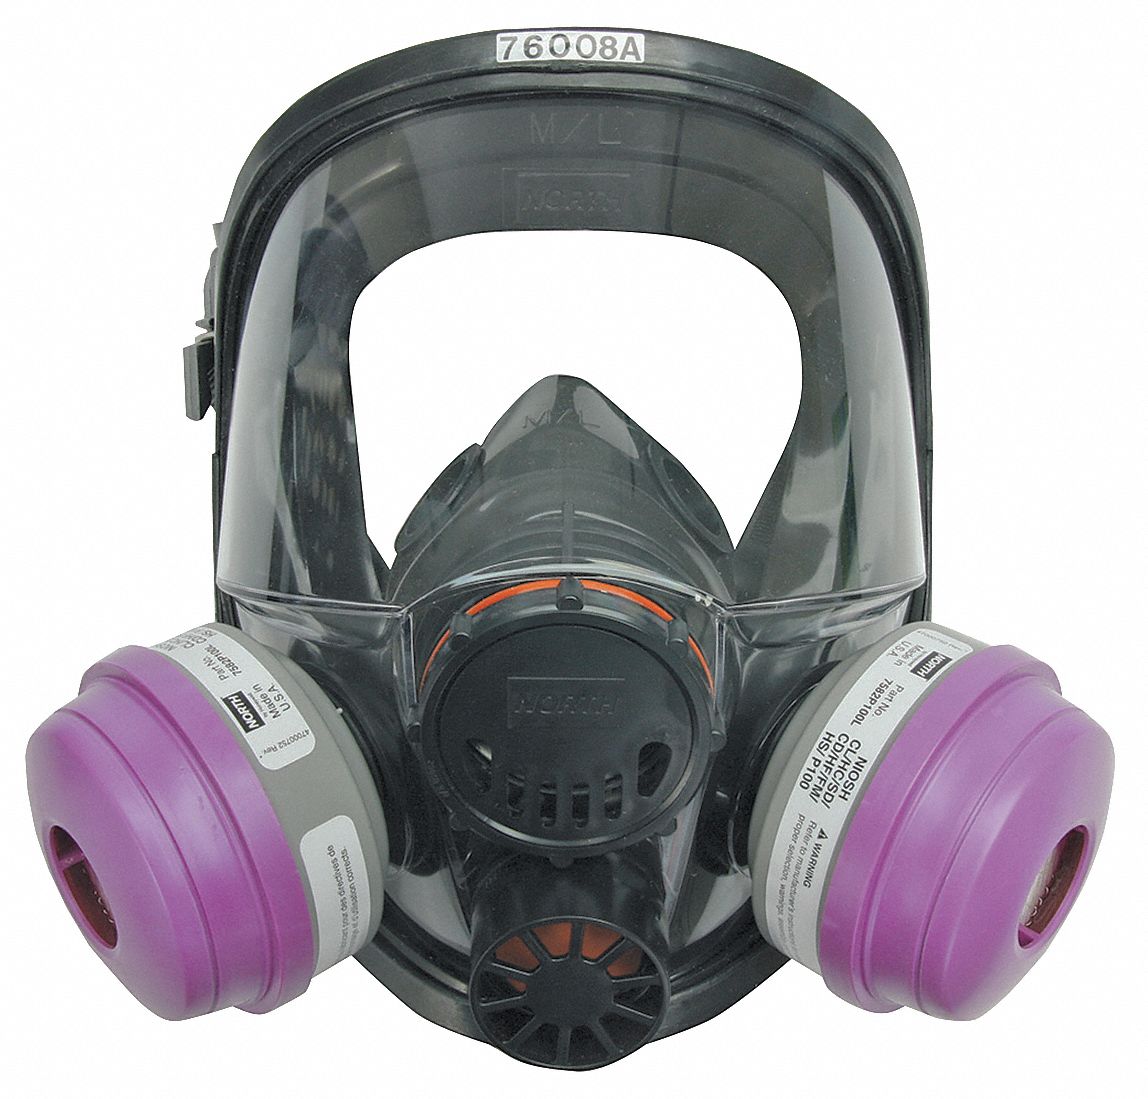 Quick Quide With Thoughts About Masks, Respirators And Personal ...